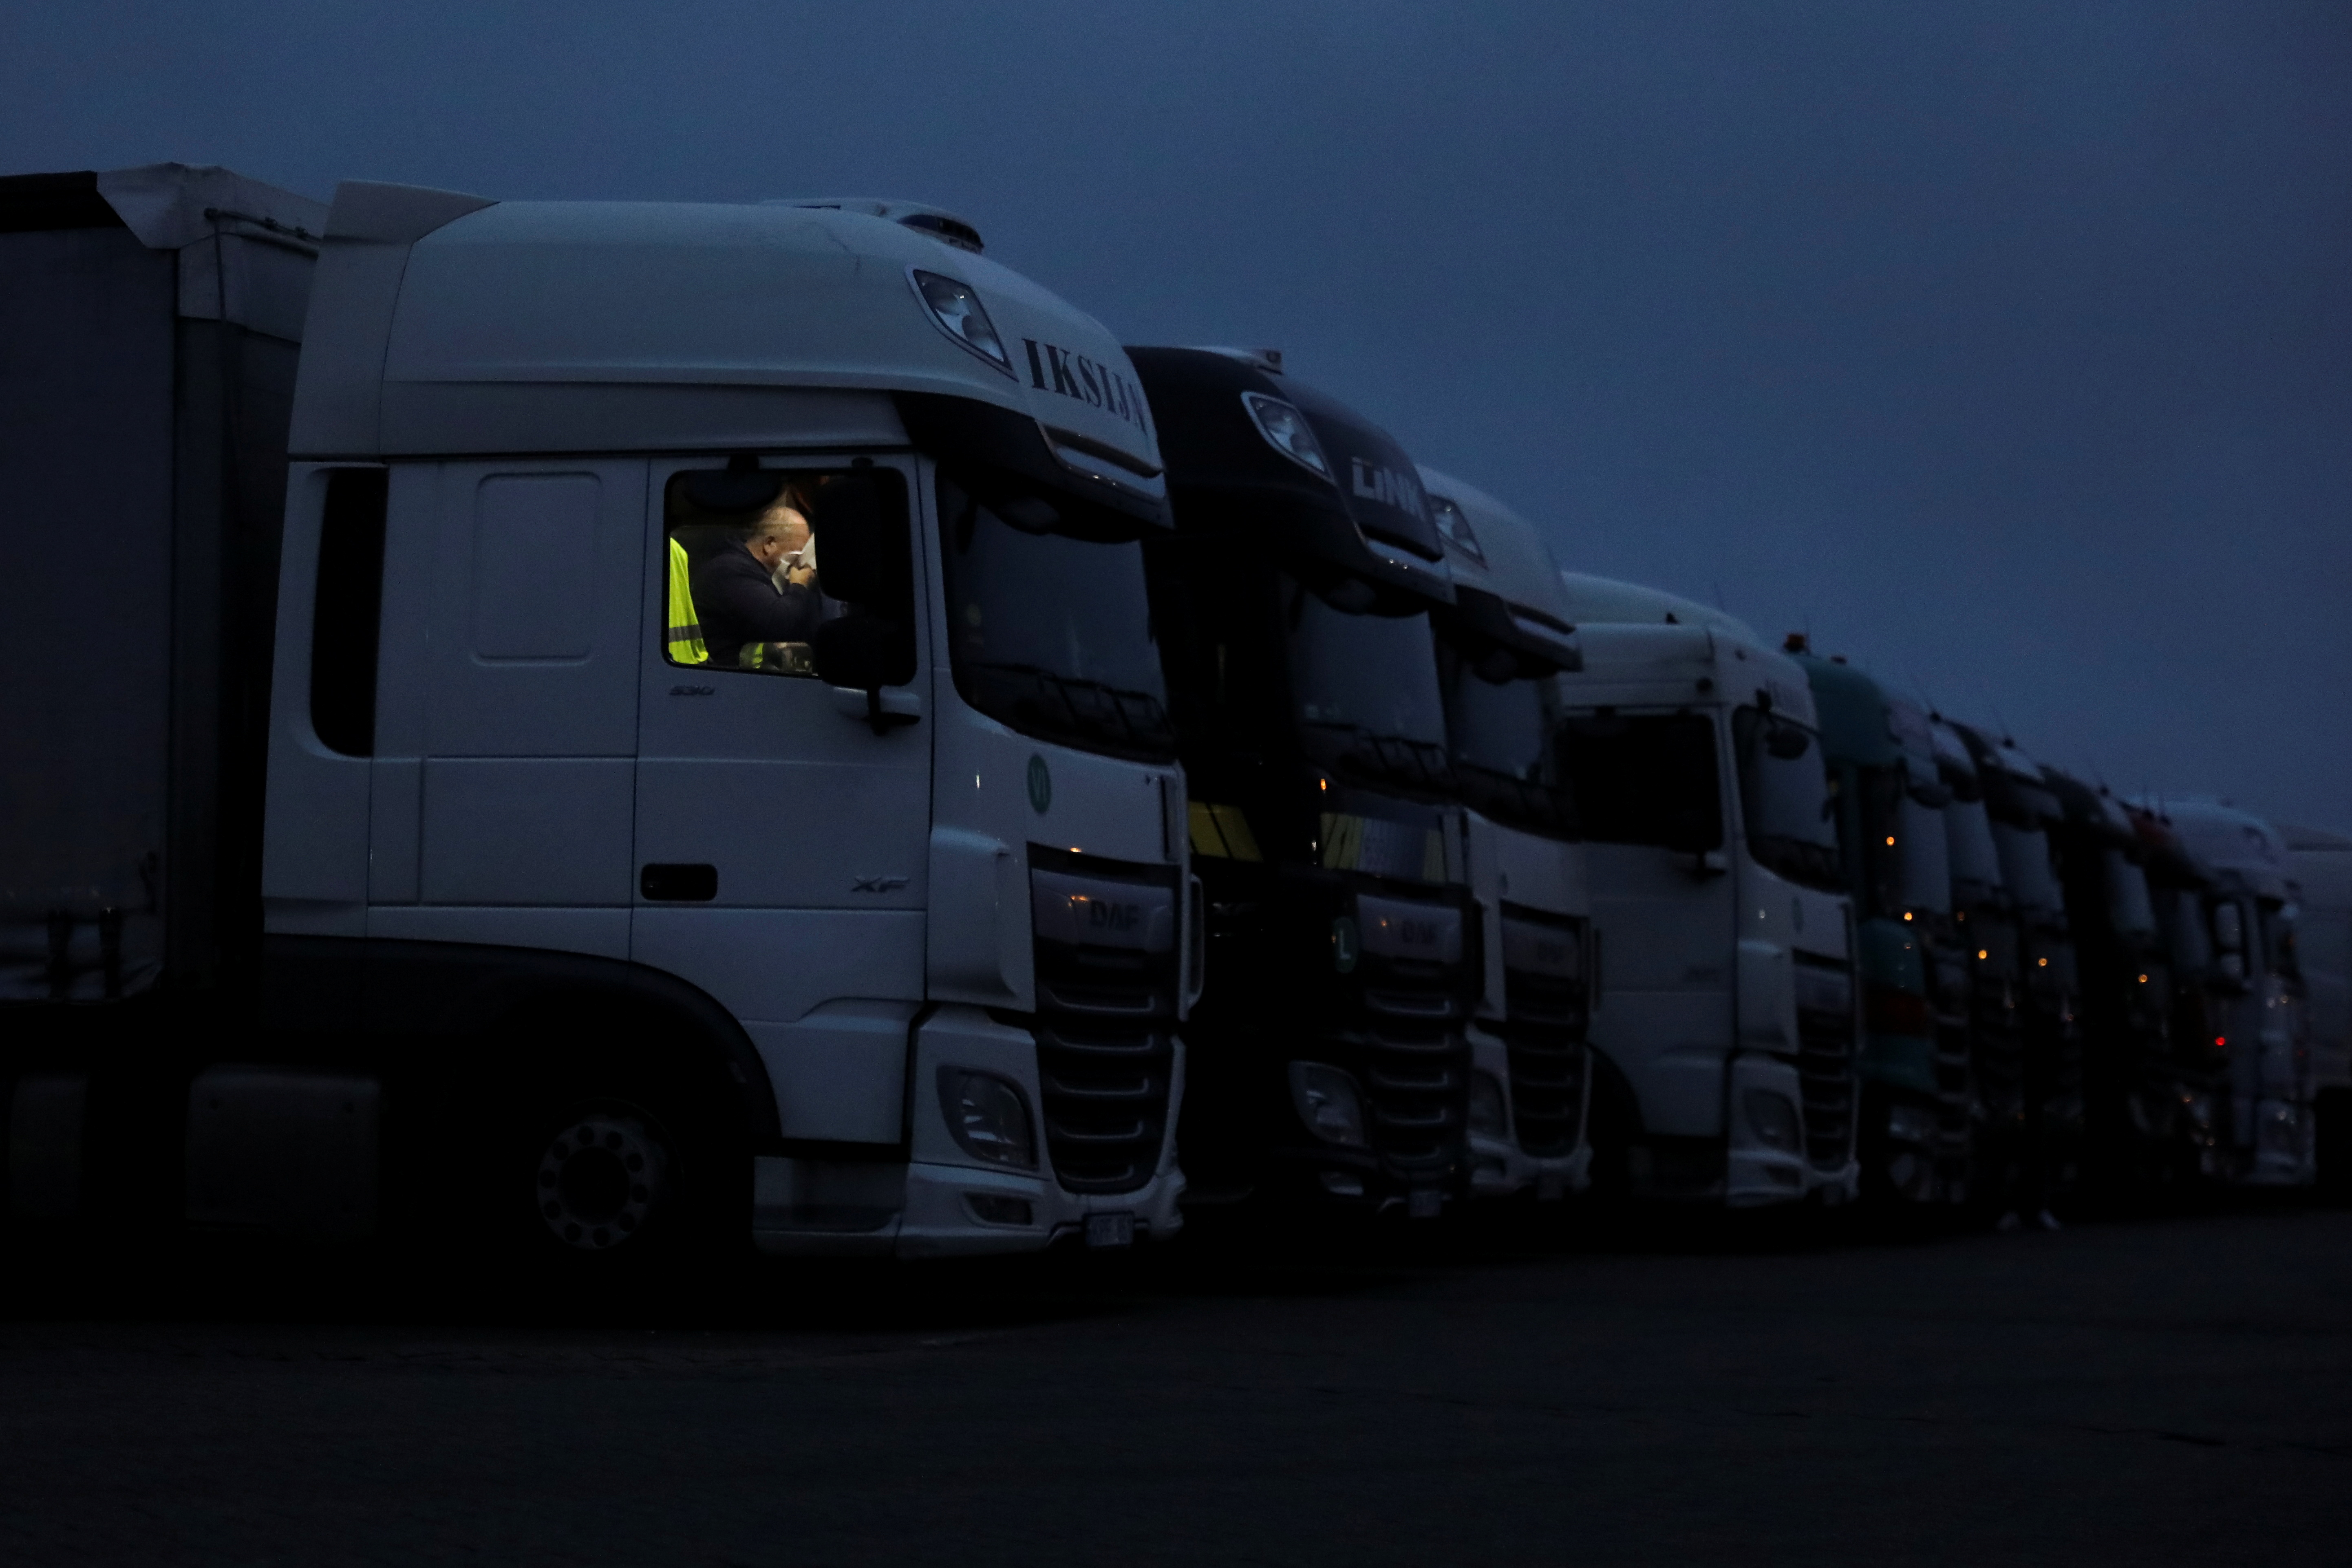 UK plans to ease truck driver rules to address shortage